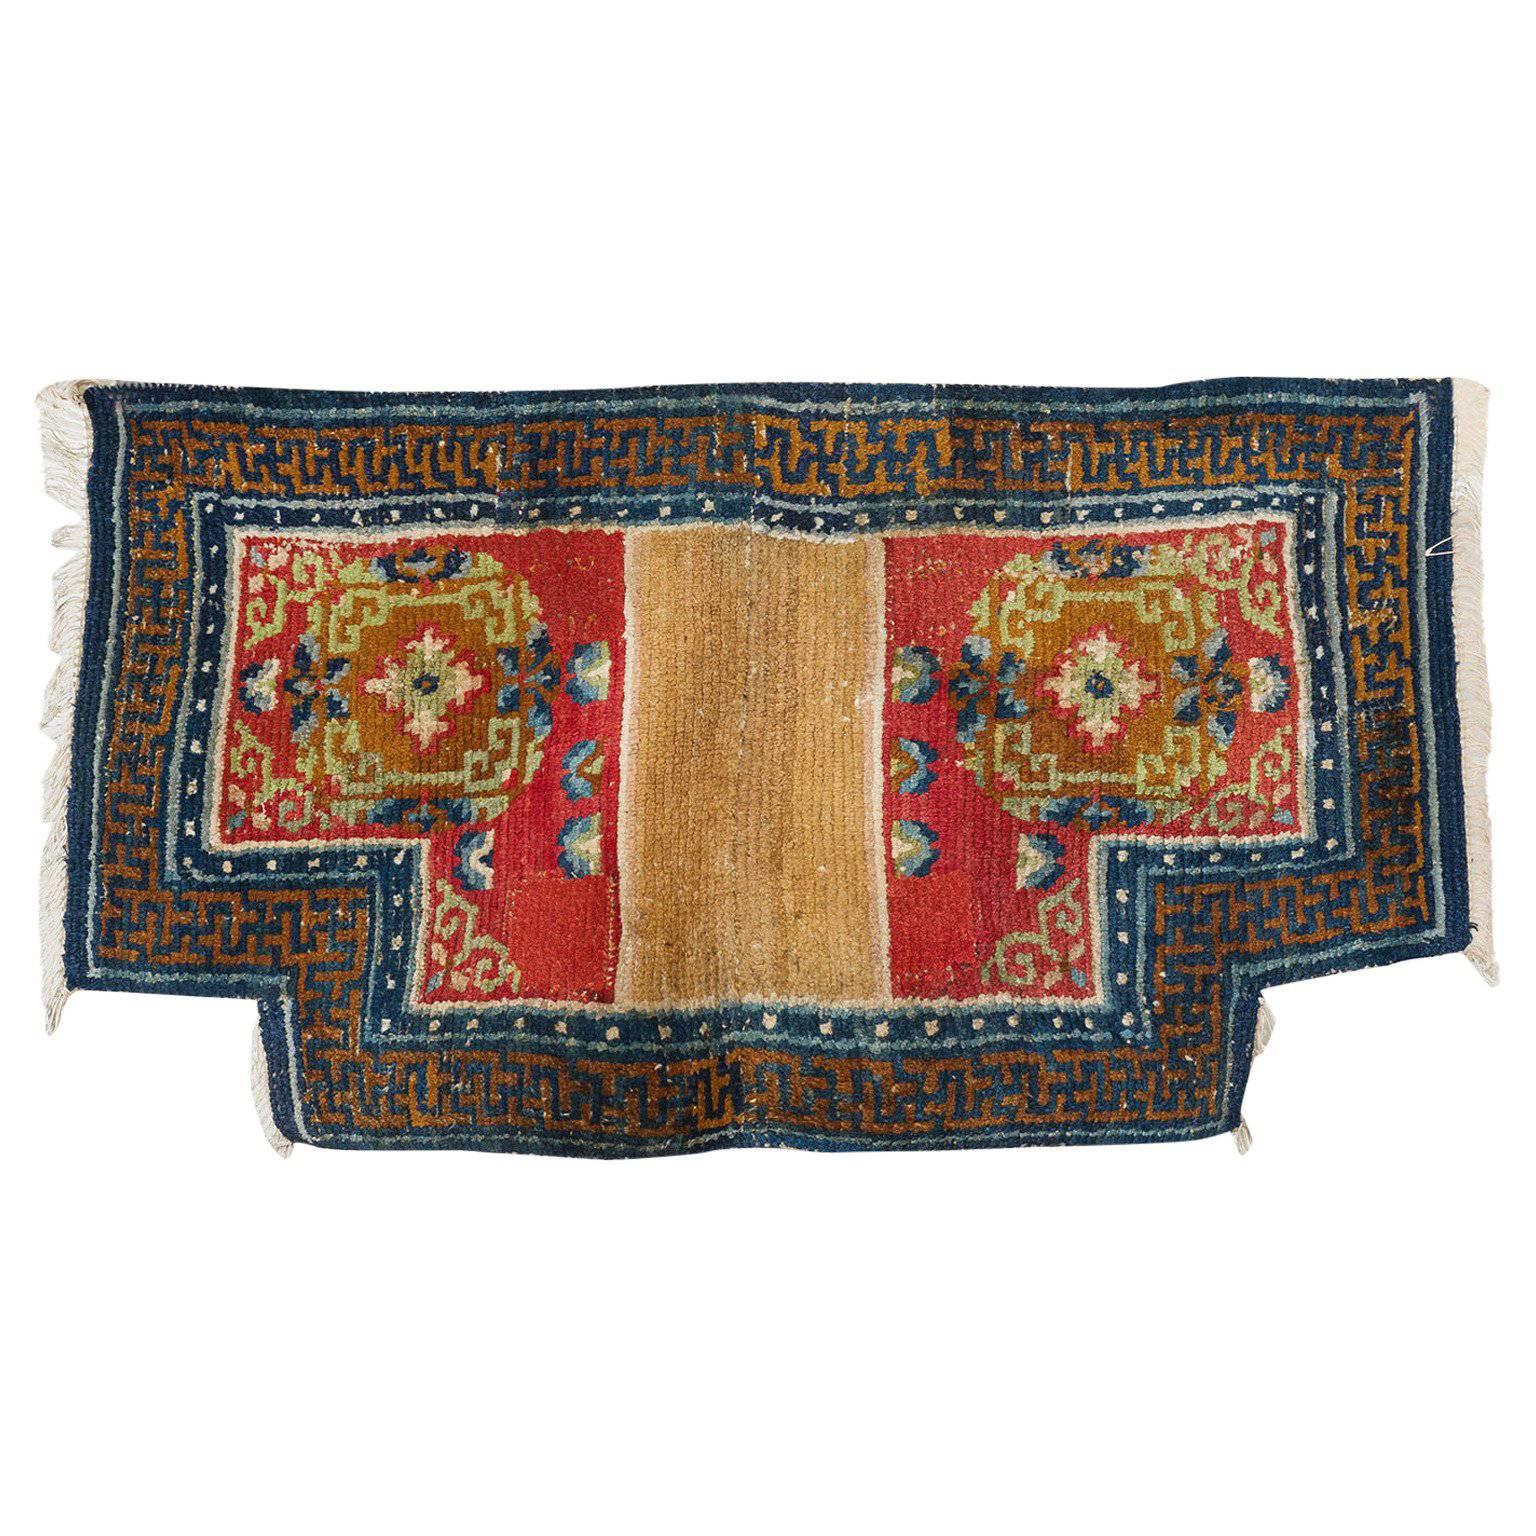 Collectible Horse Saddle from Tibet, Also Wall Hanging